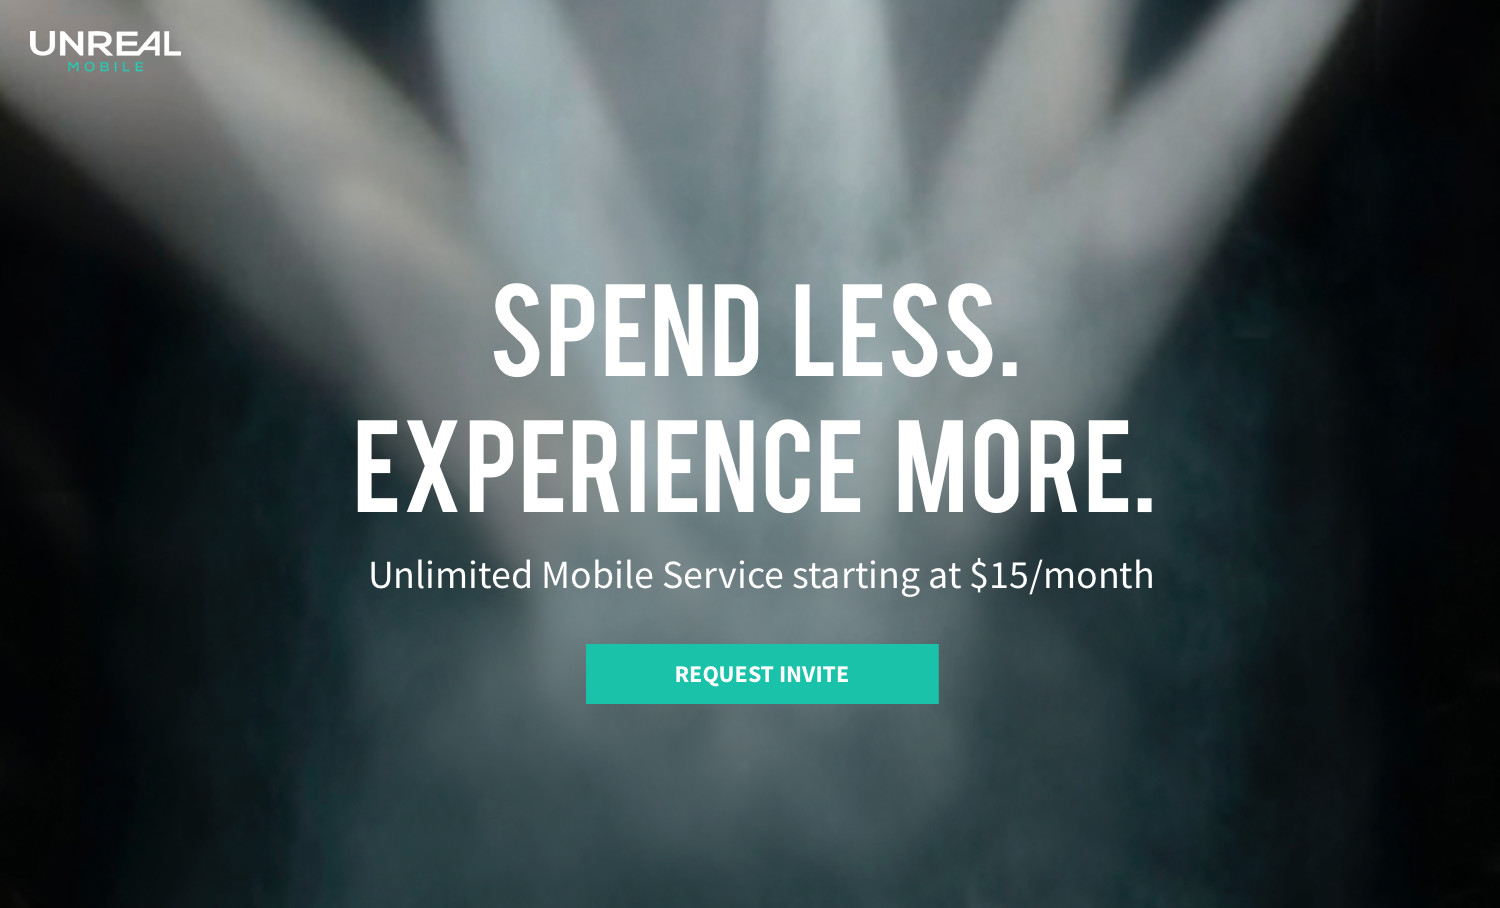 The front of the website promoting Unreal Mobile.